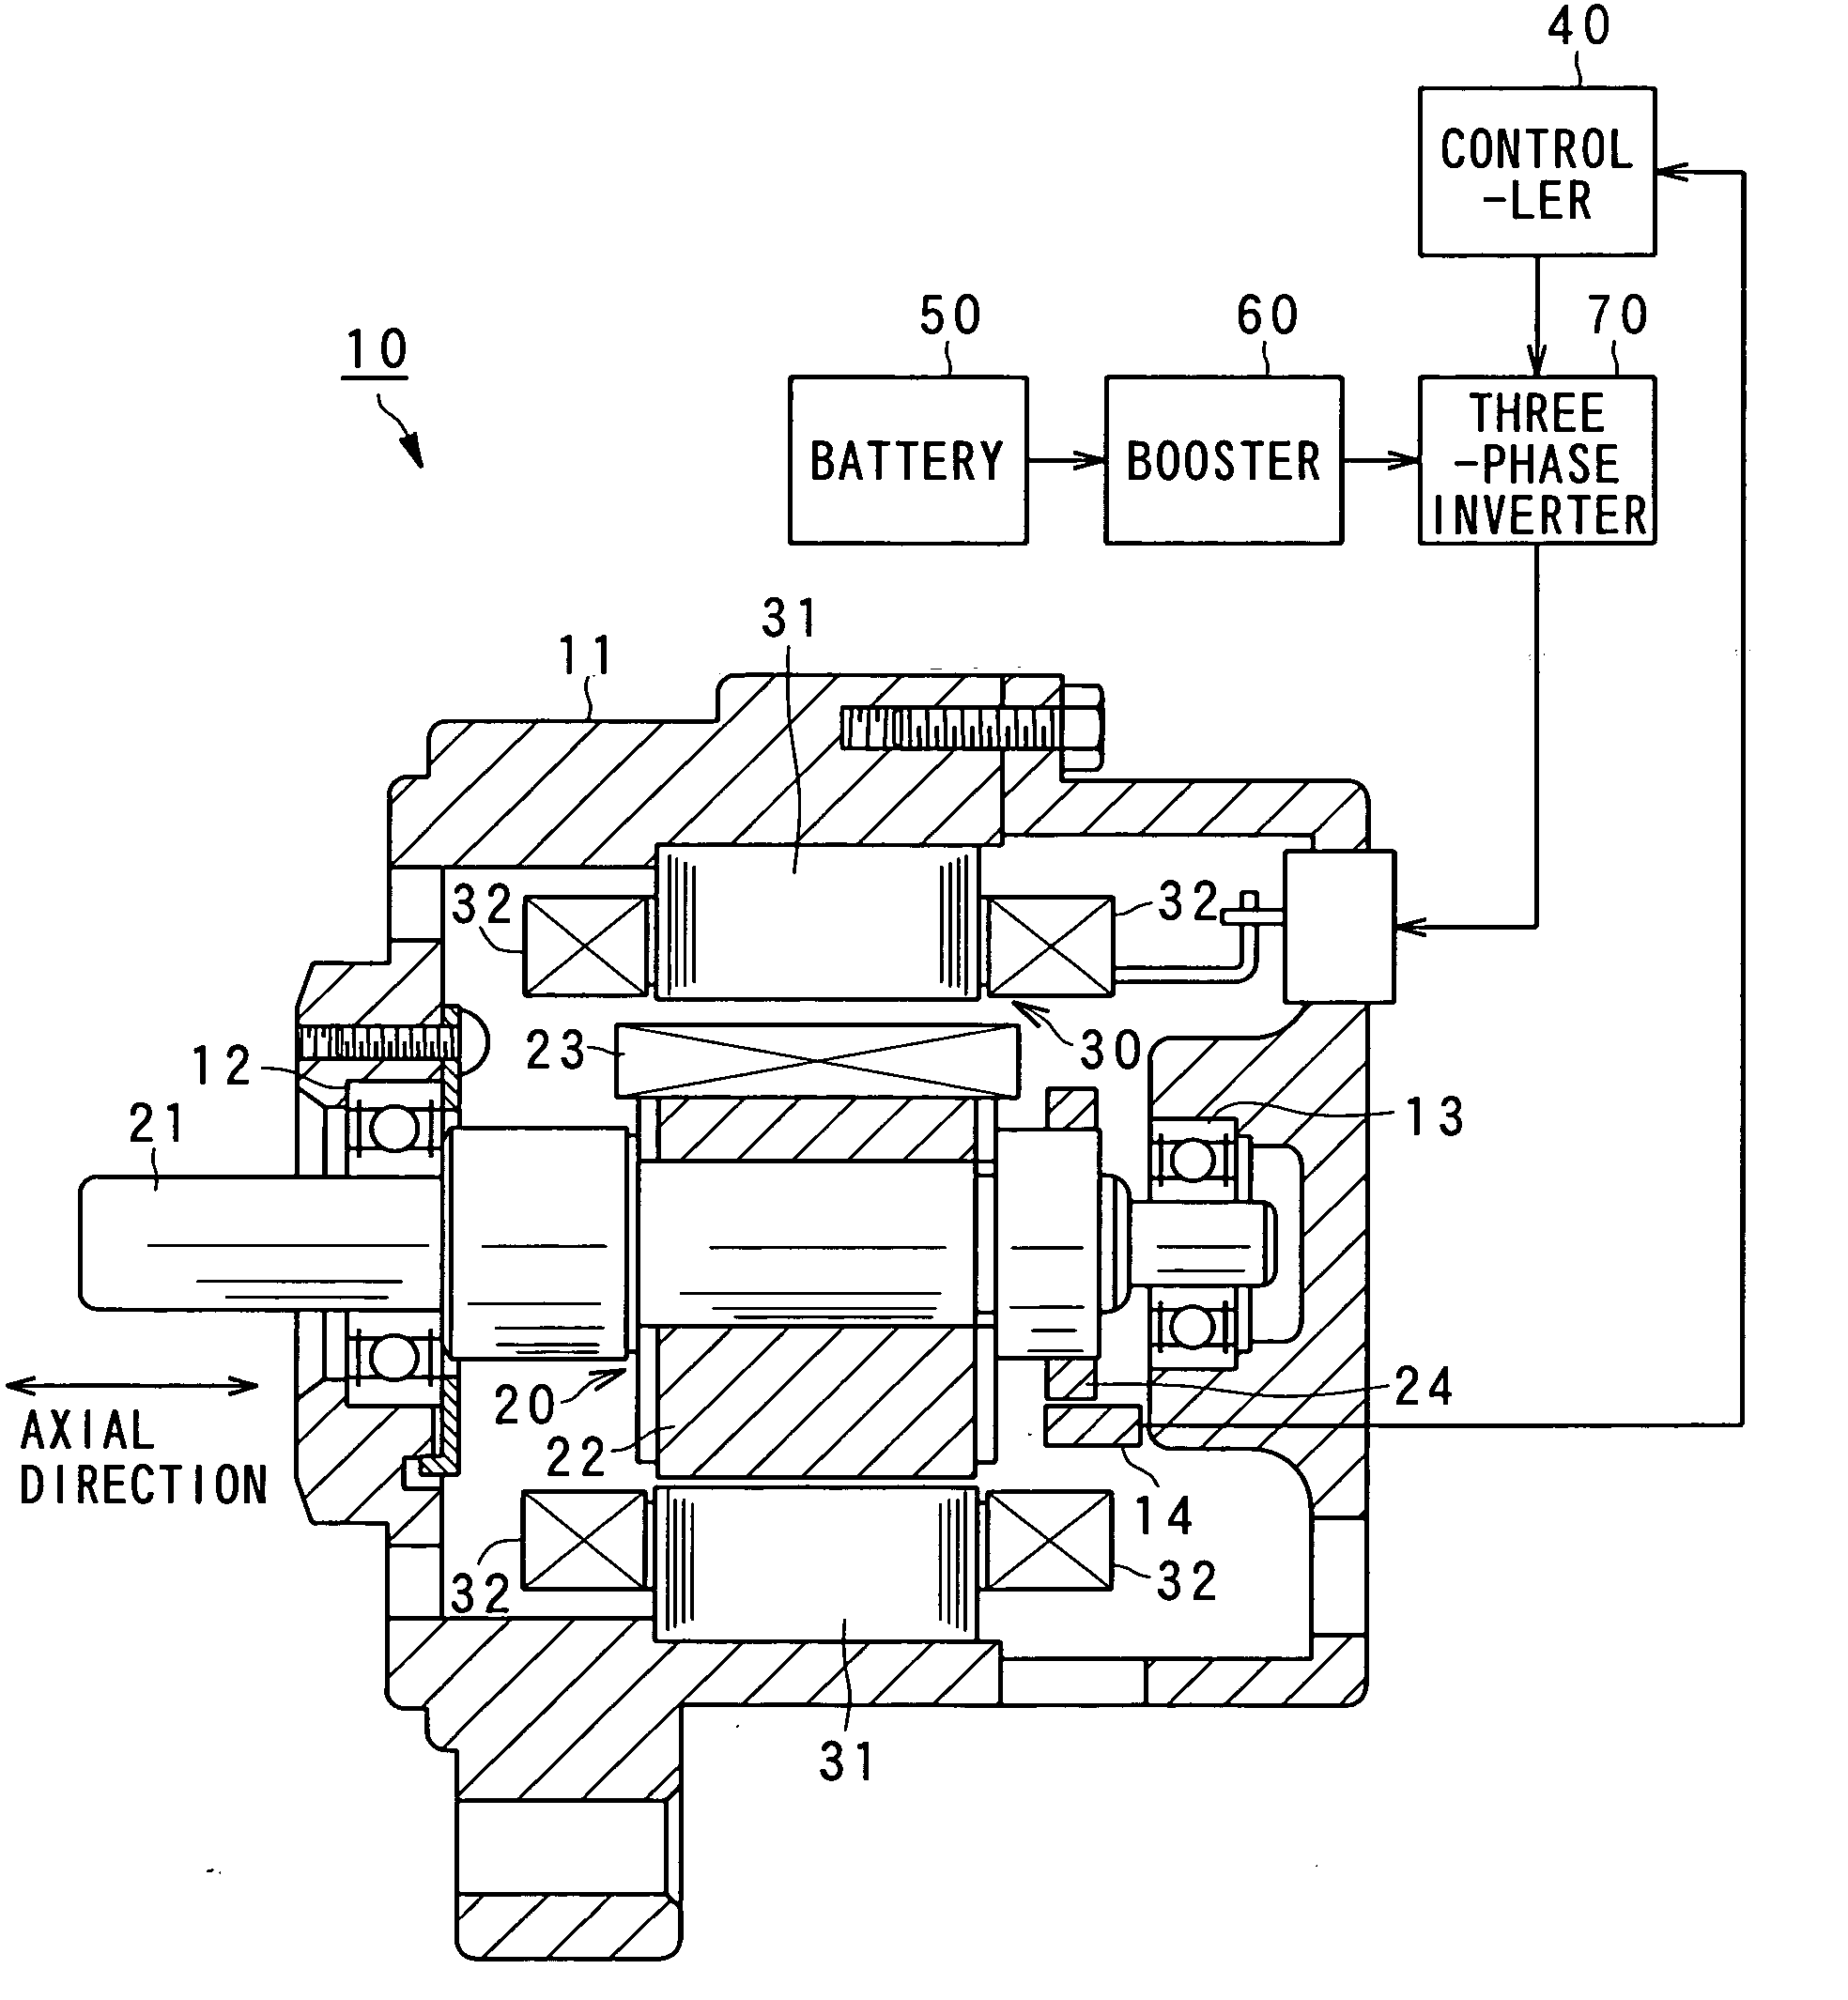 Rotary electric apparatus having rotor with field winding inducing current therethrough for generating magnetic field